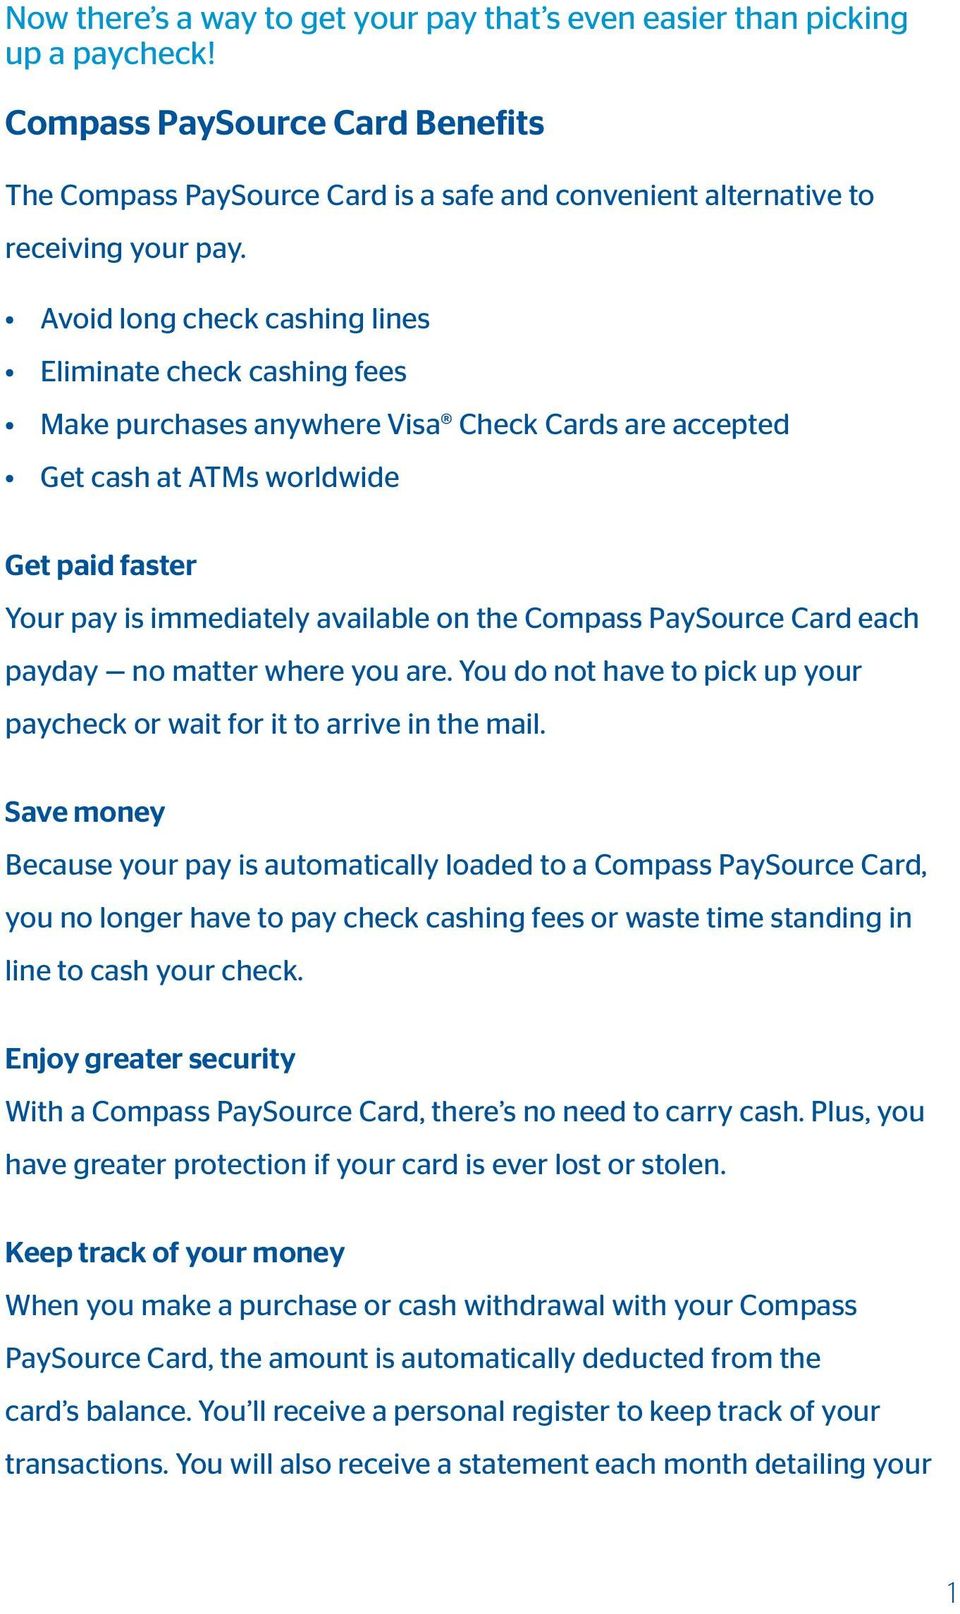 Compass PaySource Card each payday no matter where you are. You do not have to pick up your paycheck or wait for it to arrive in the mail.